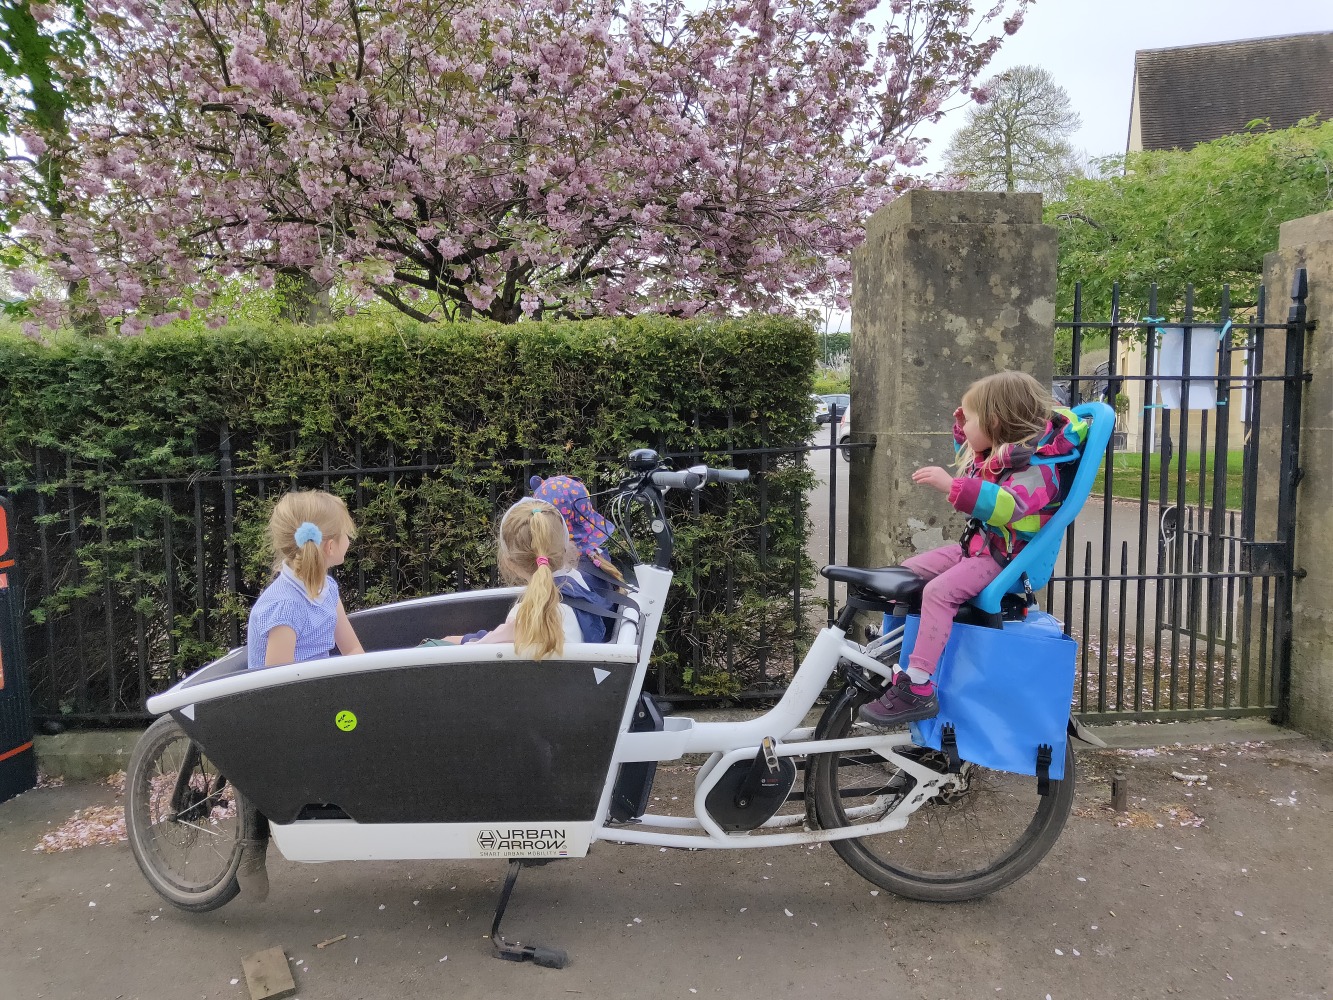 Box bike with four children in it